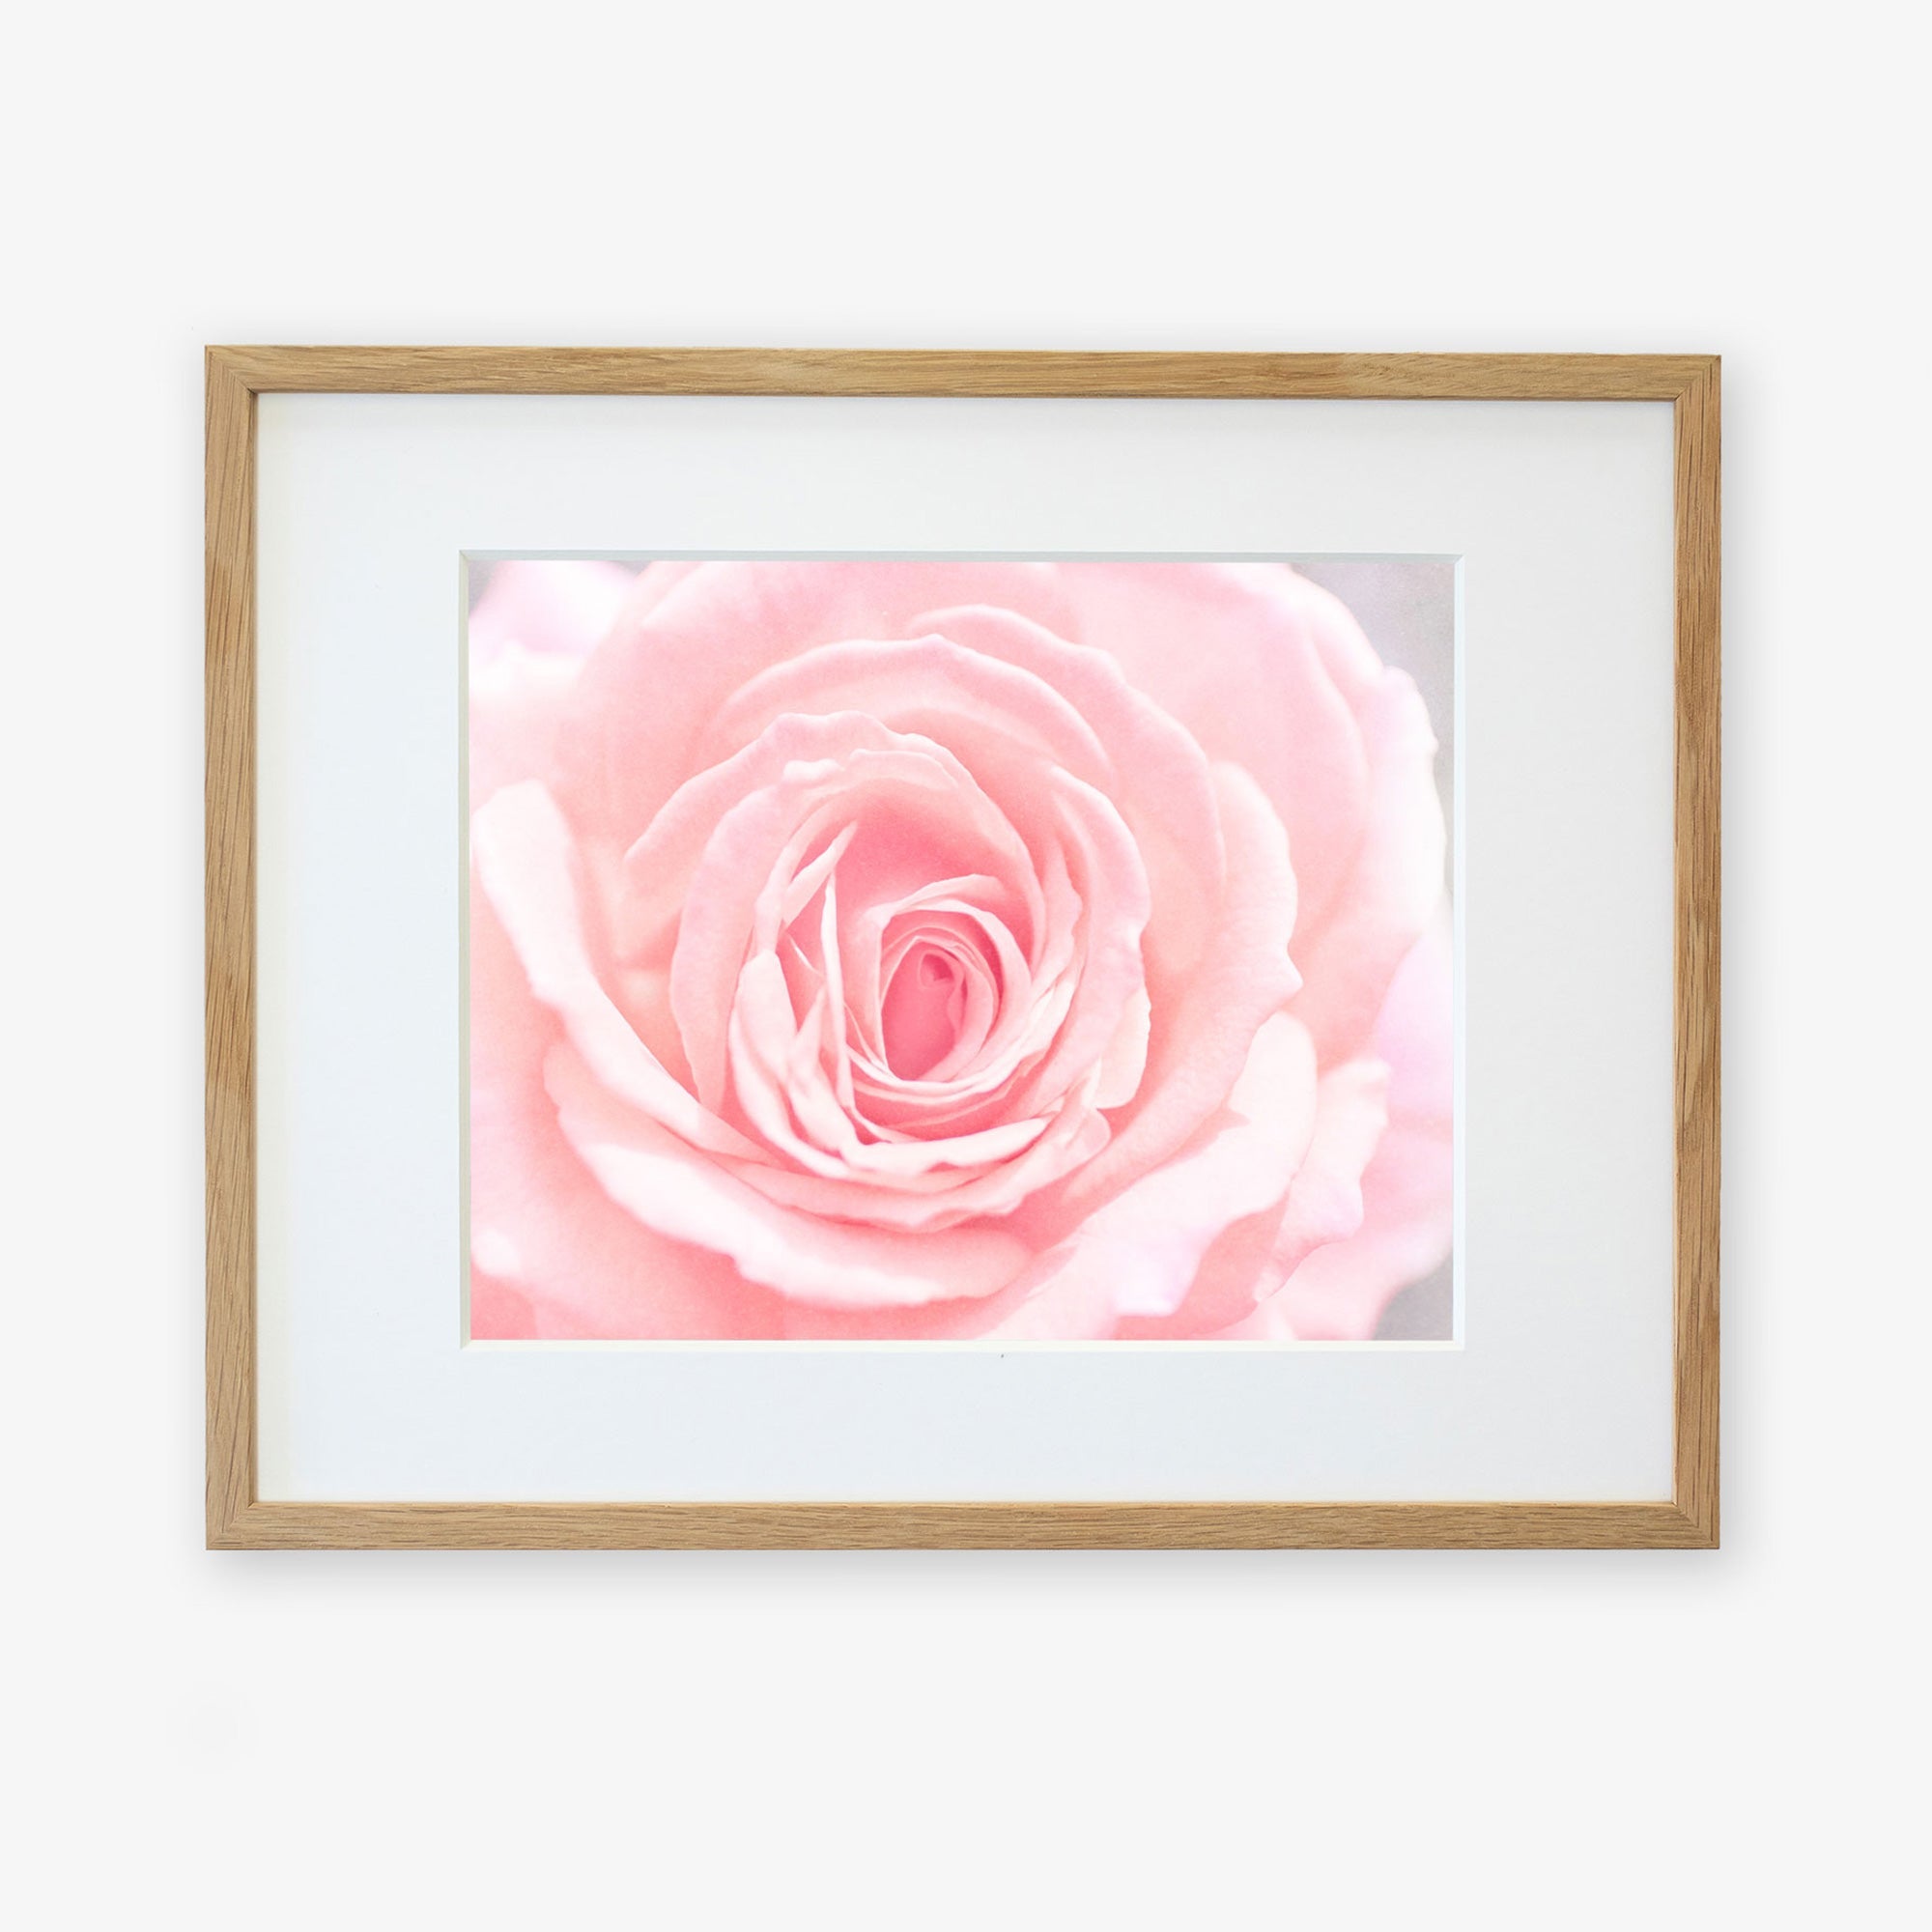 A framed Pink and Shabby print of a close-up view of a delicate pink rose in bloom with soft focus, highlighting the intricate details of its petals, displayed in a light wooden frame by Offley Green.